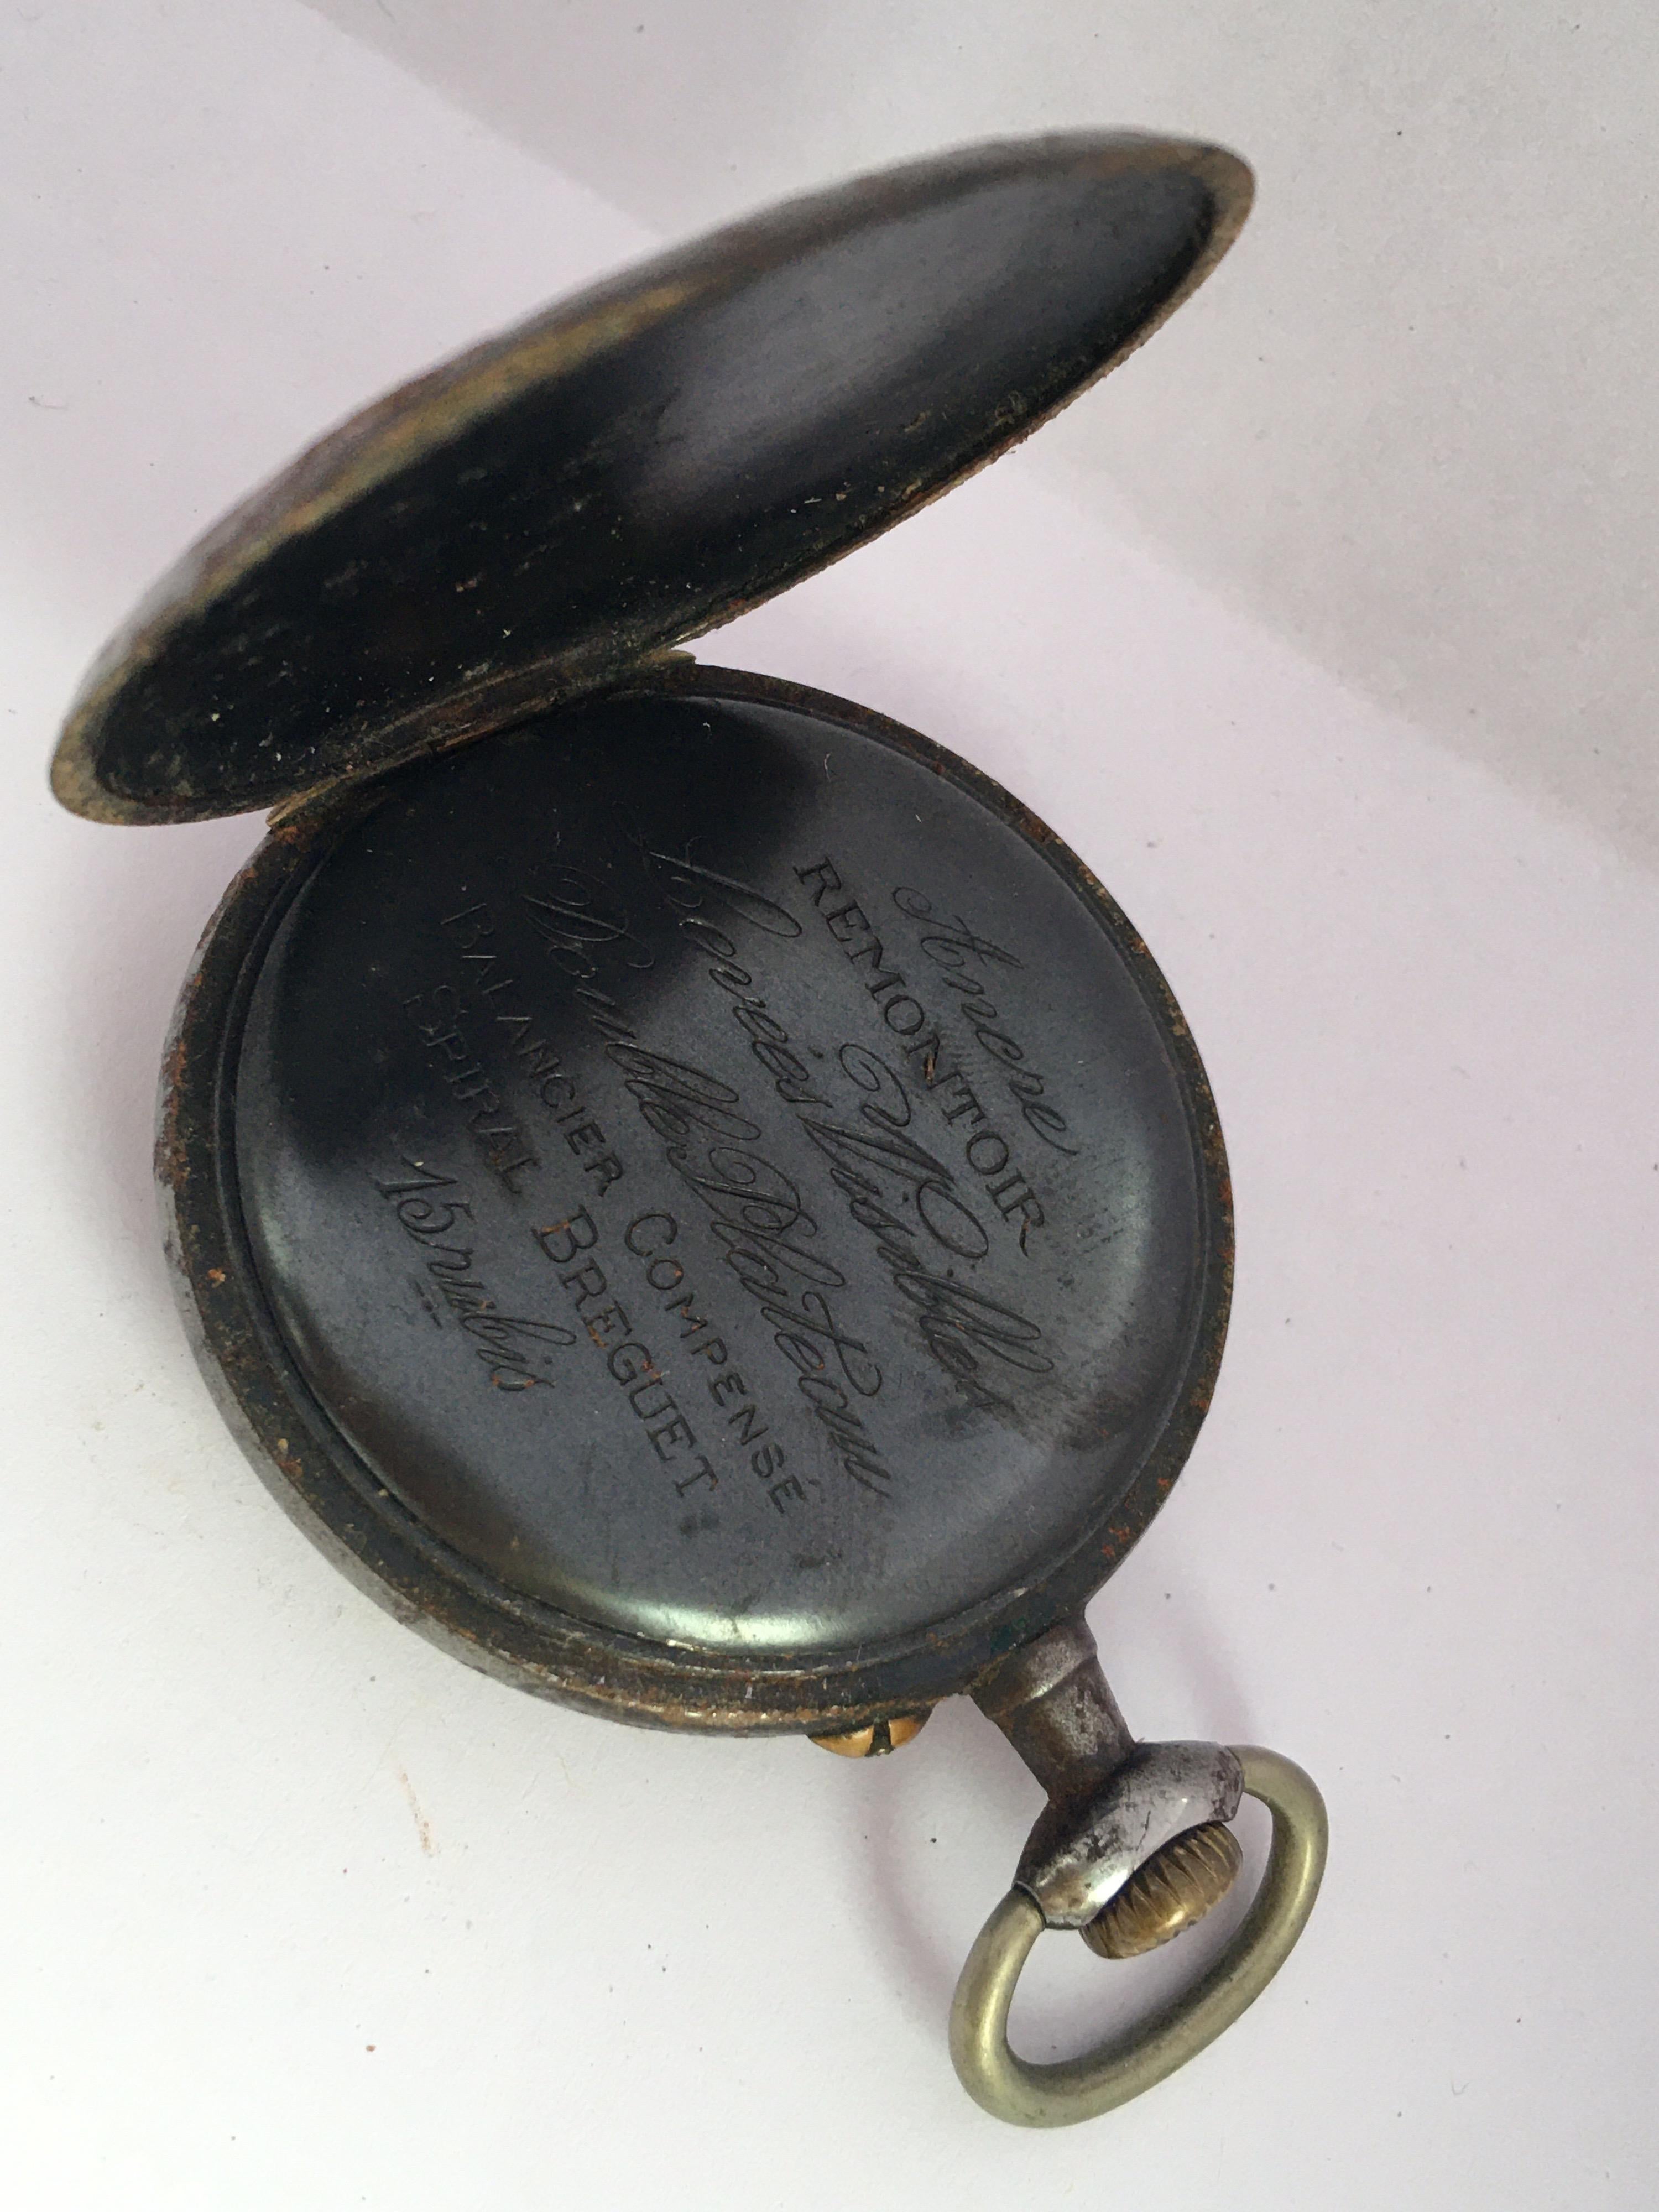 This beautiful antique 52mm diameter hand winding ( keyless) pocket watch is in good working condition and it is ticking well. It keeps a good time. Visible signs of ageing and wear with light marks and some rust on the watch case as shown. Please